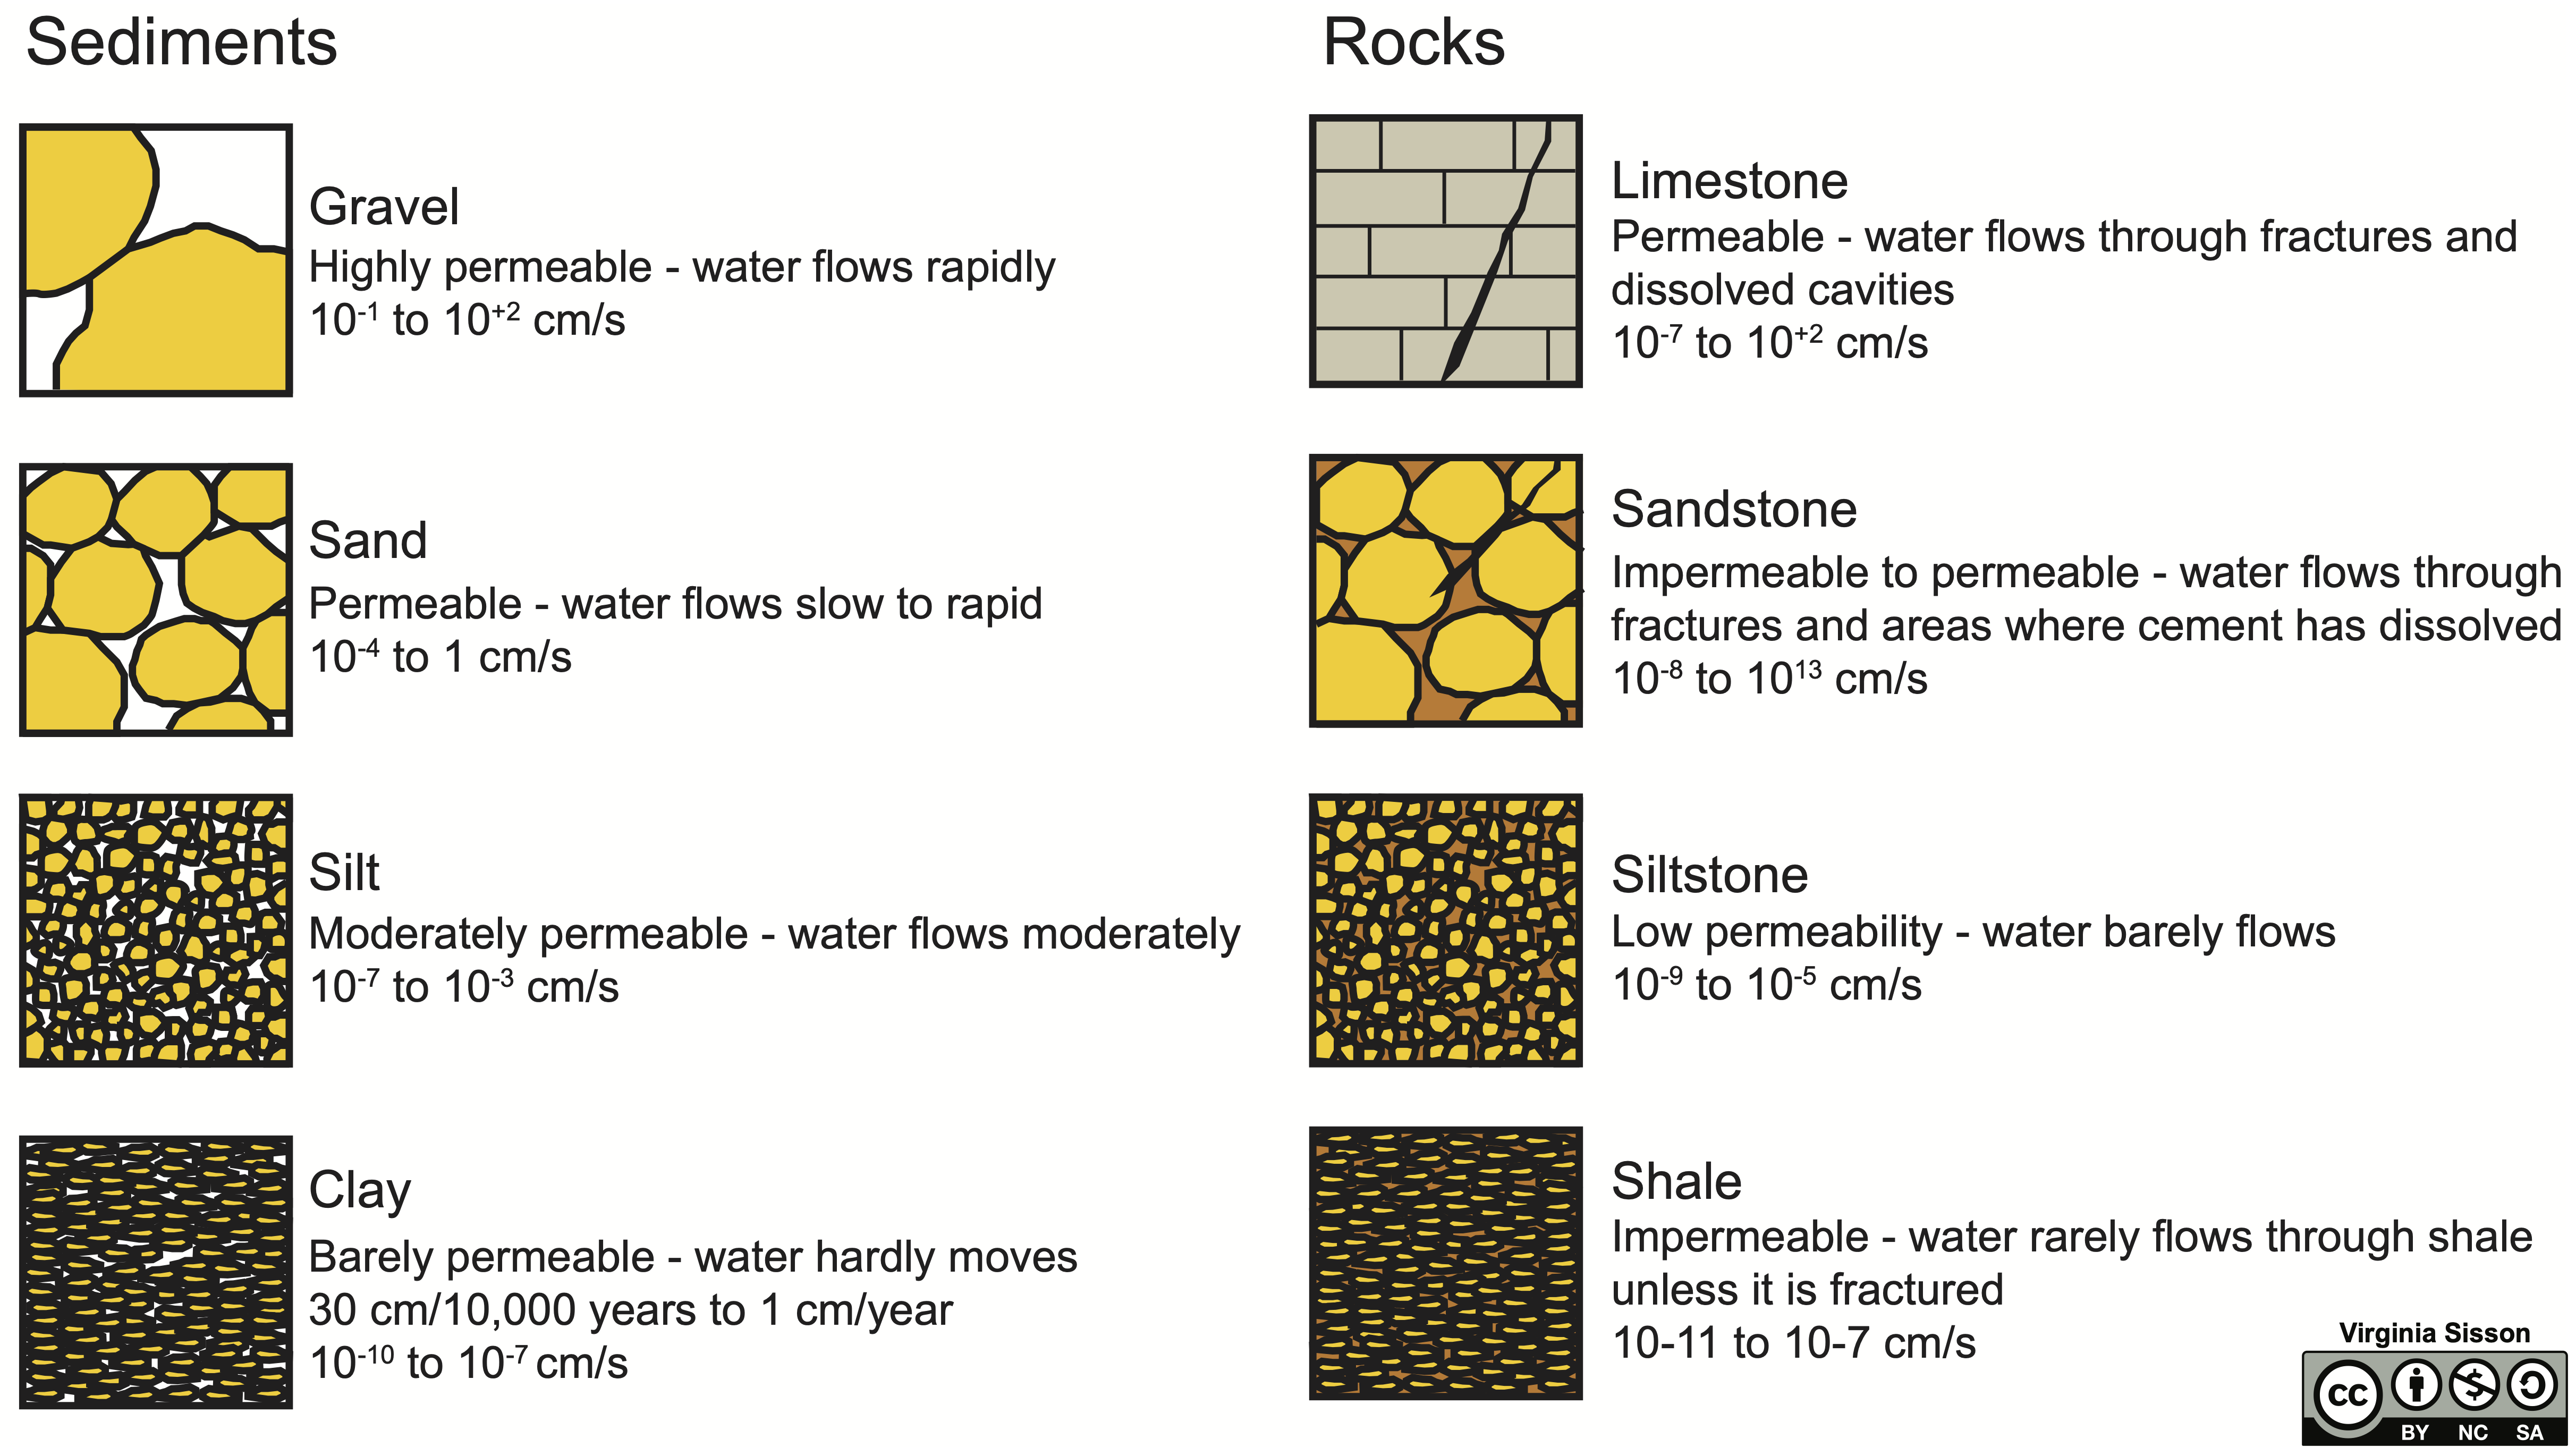 Permeability of sediments and rocks